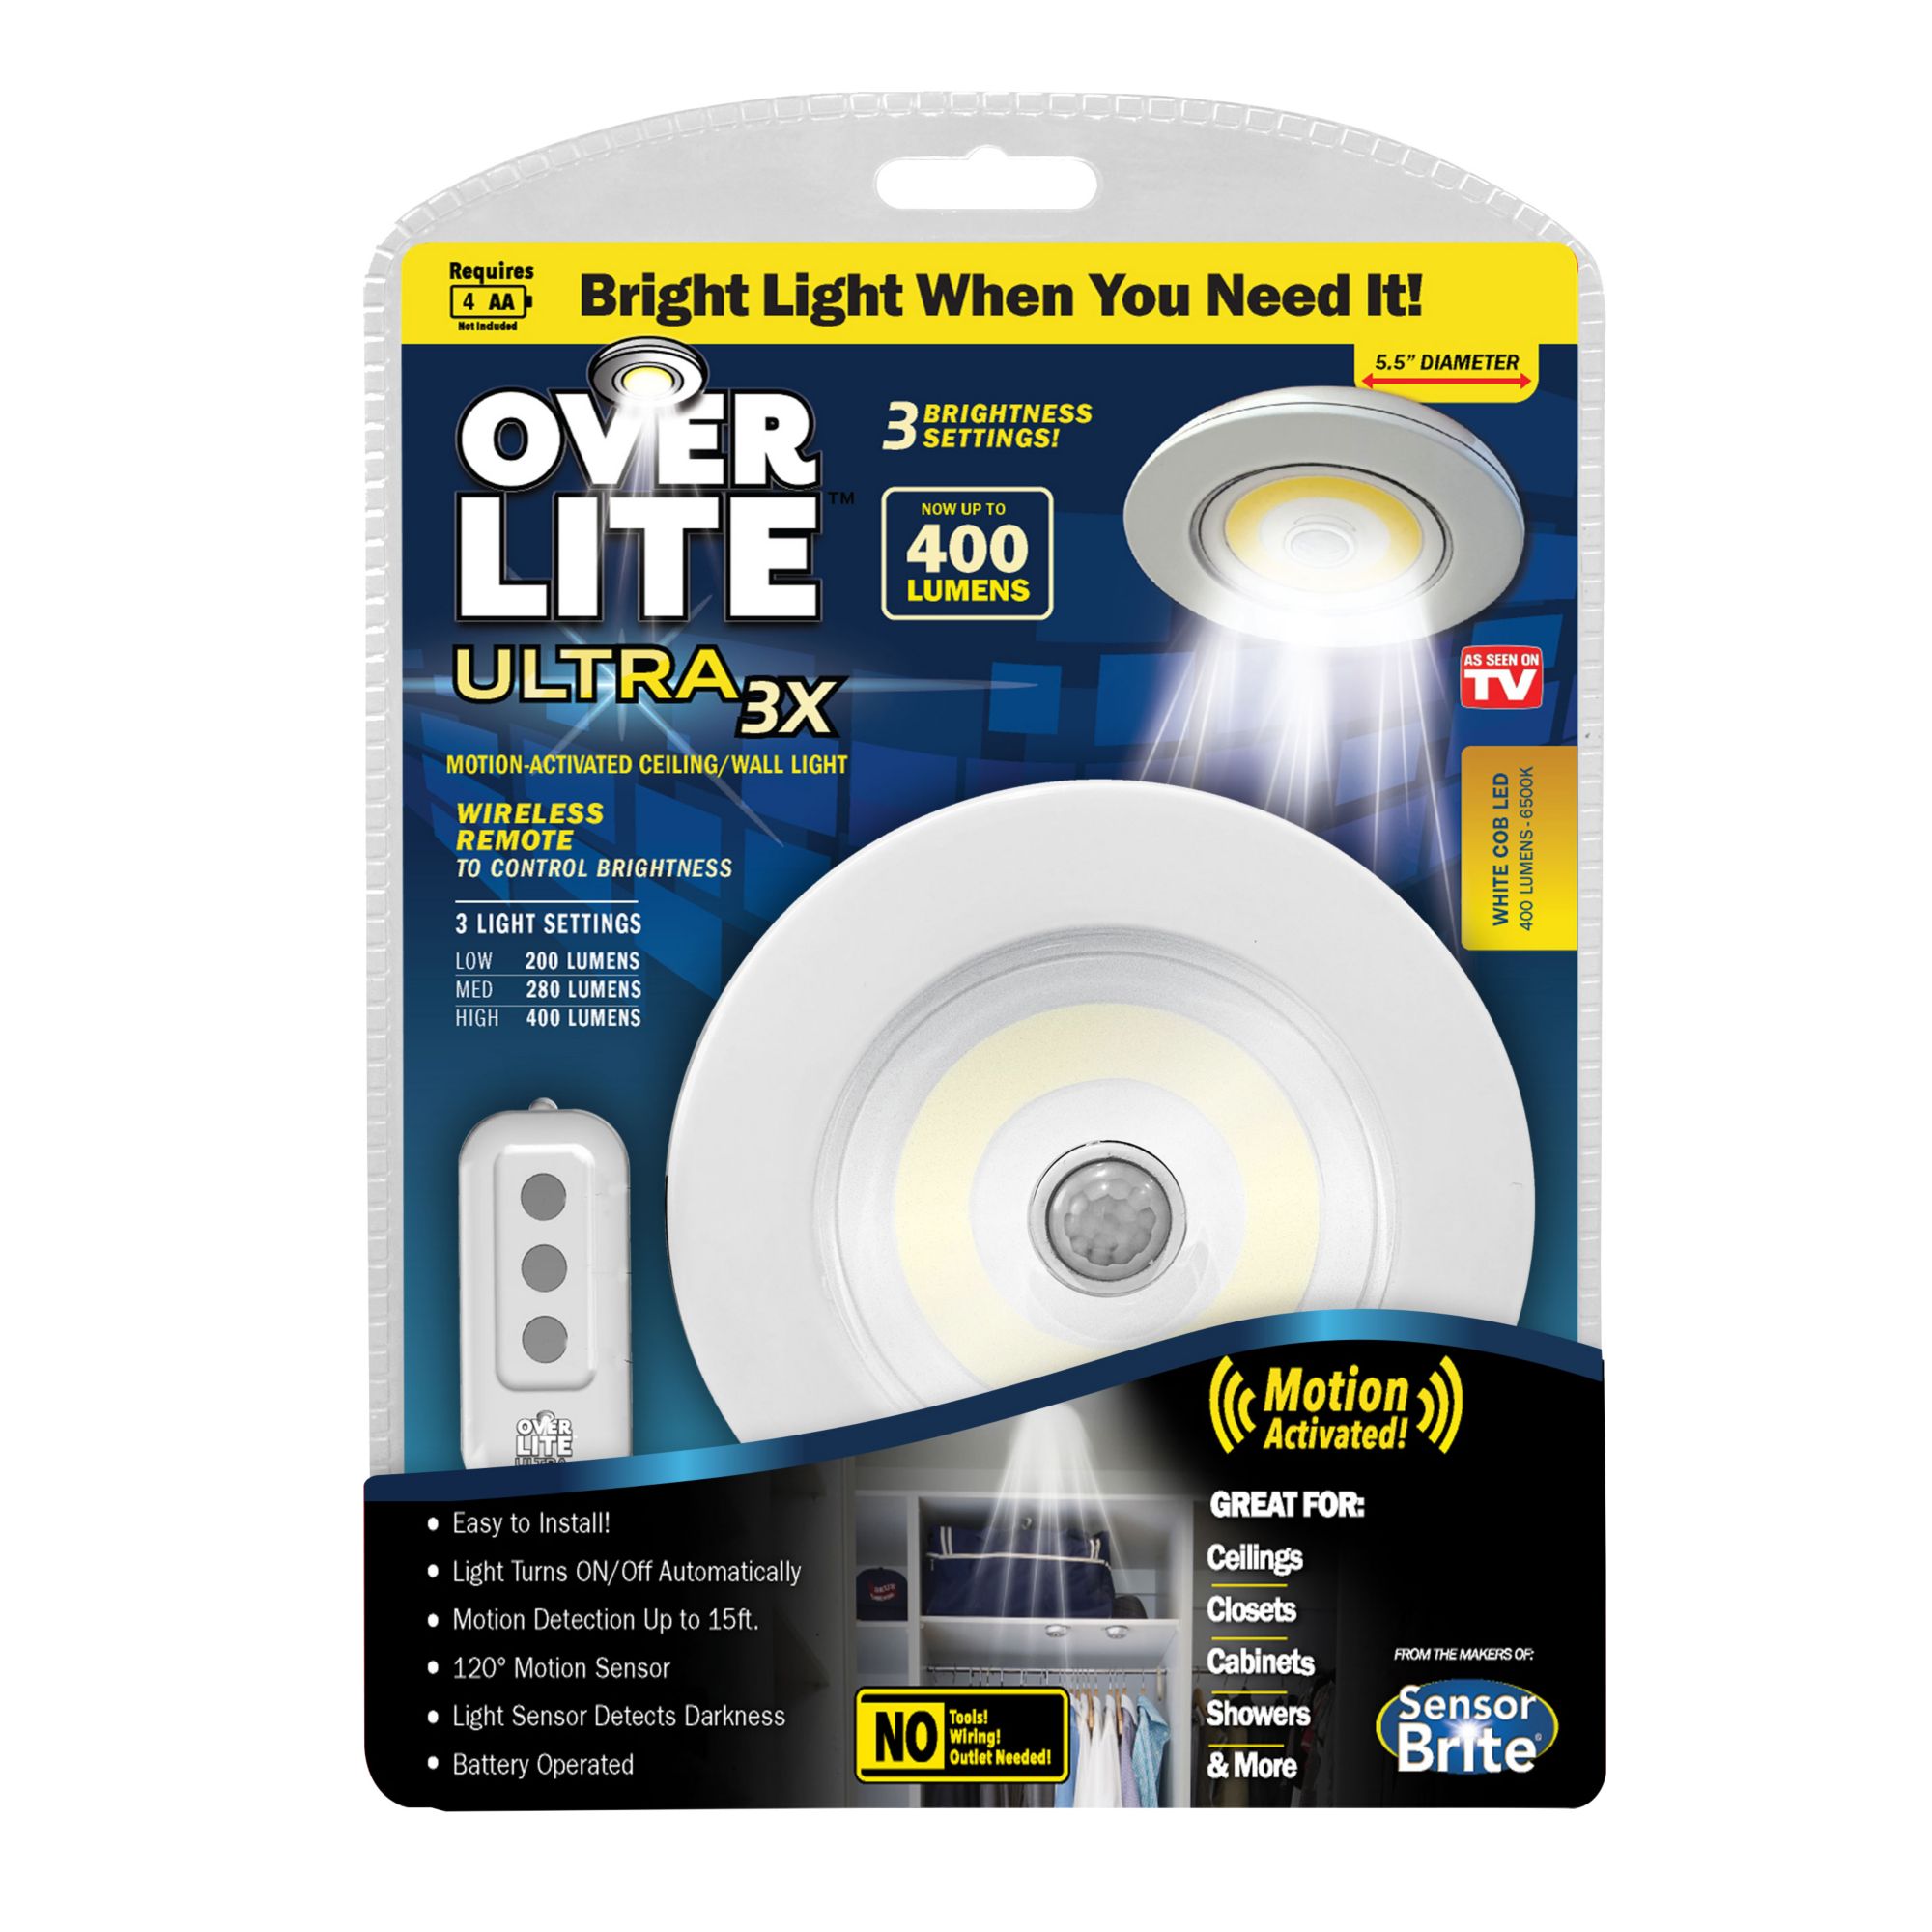 Over Lite Ultra 3X Motion Activated Ceiling/Wall Light